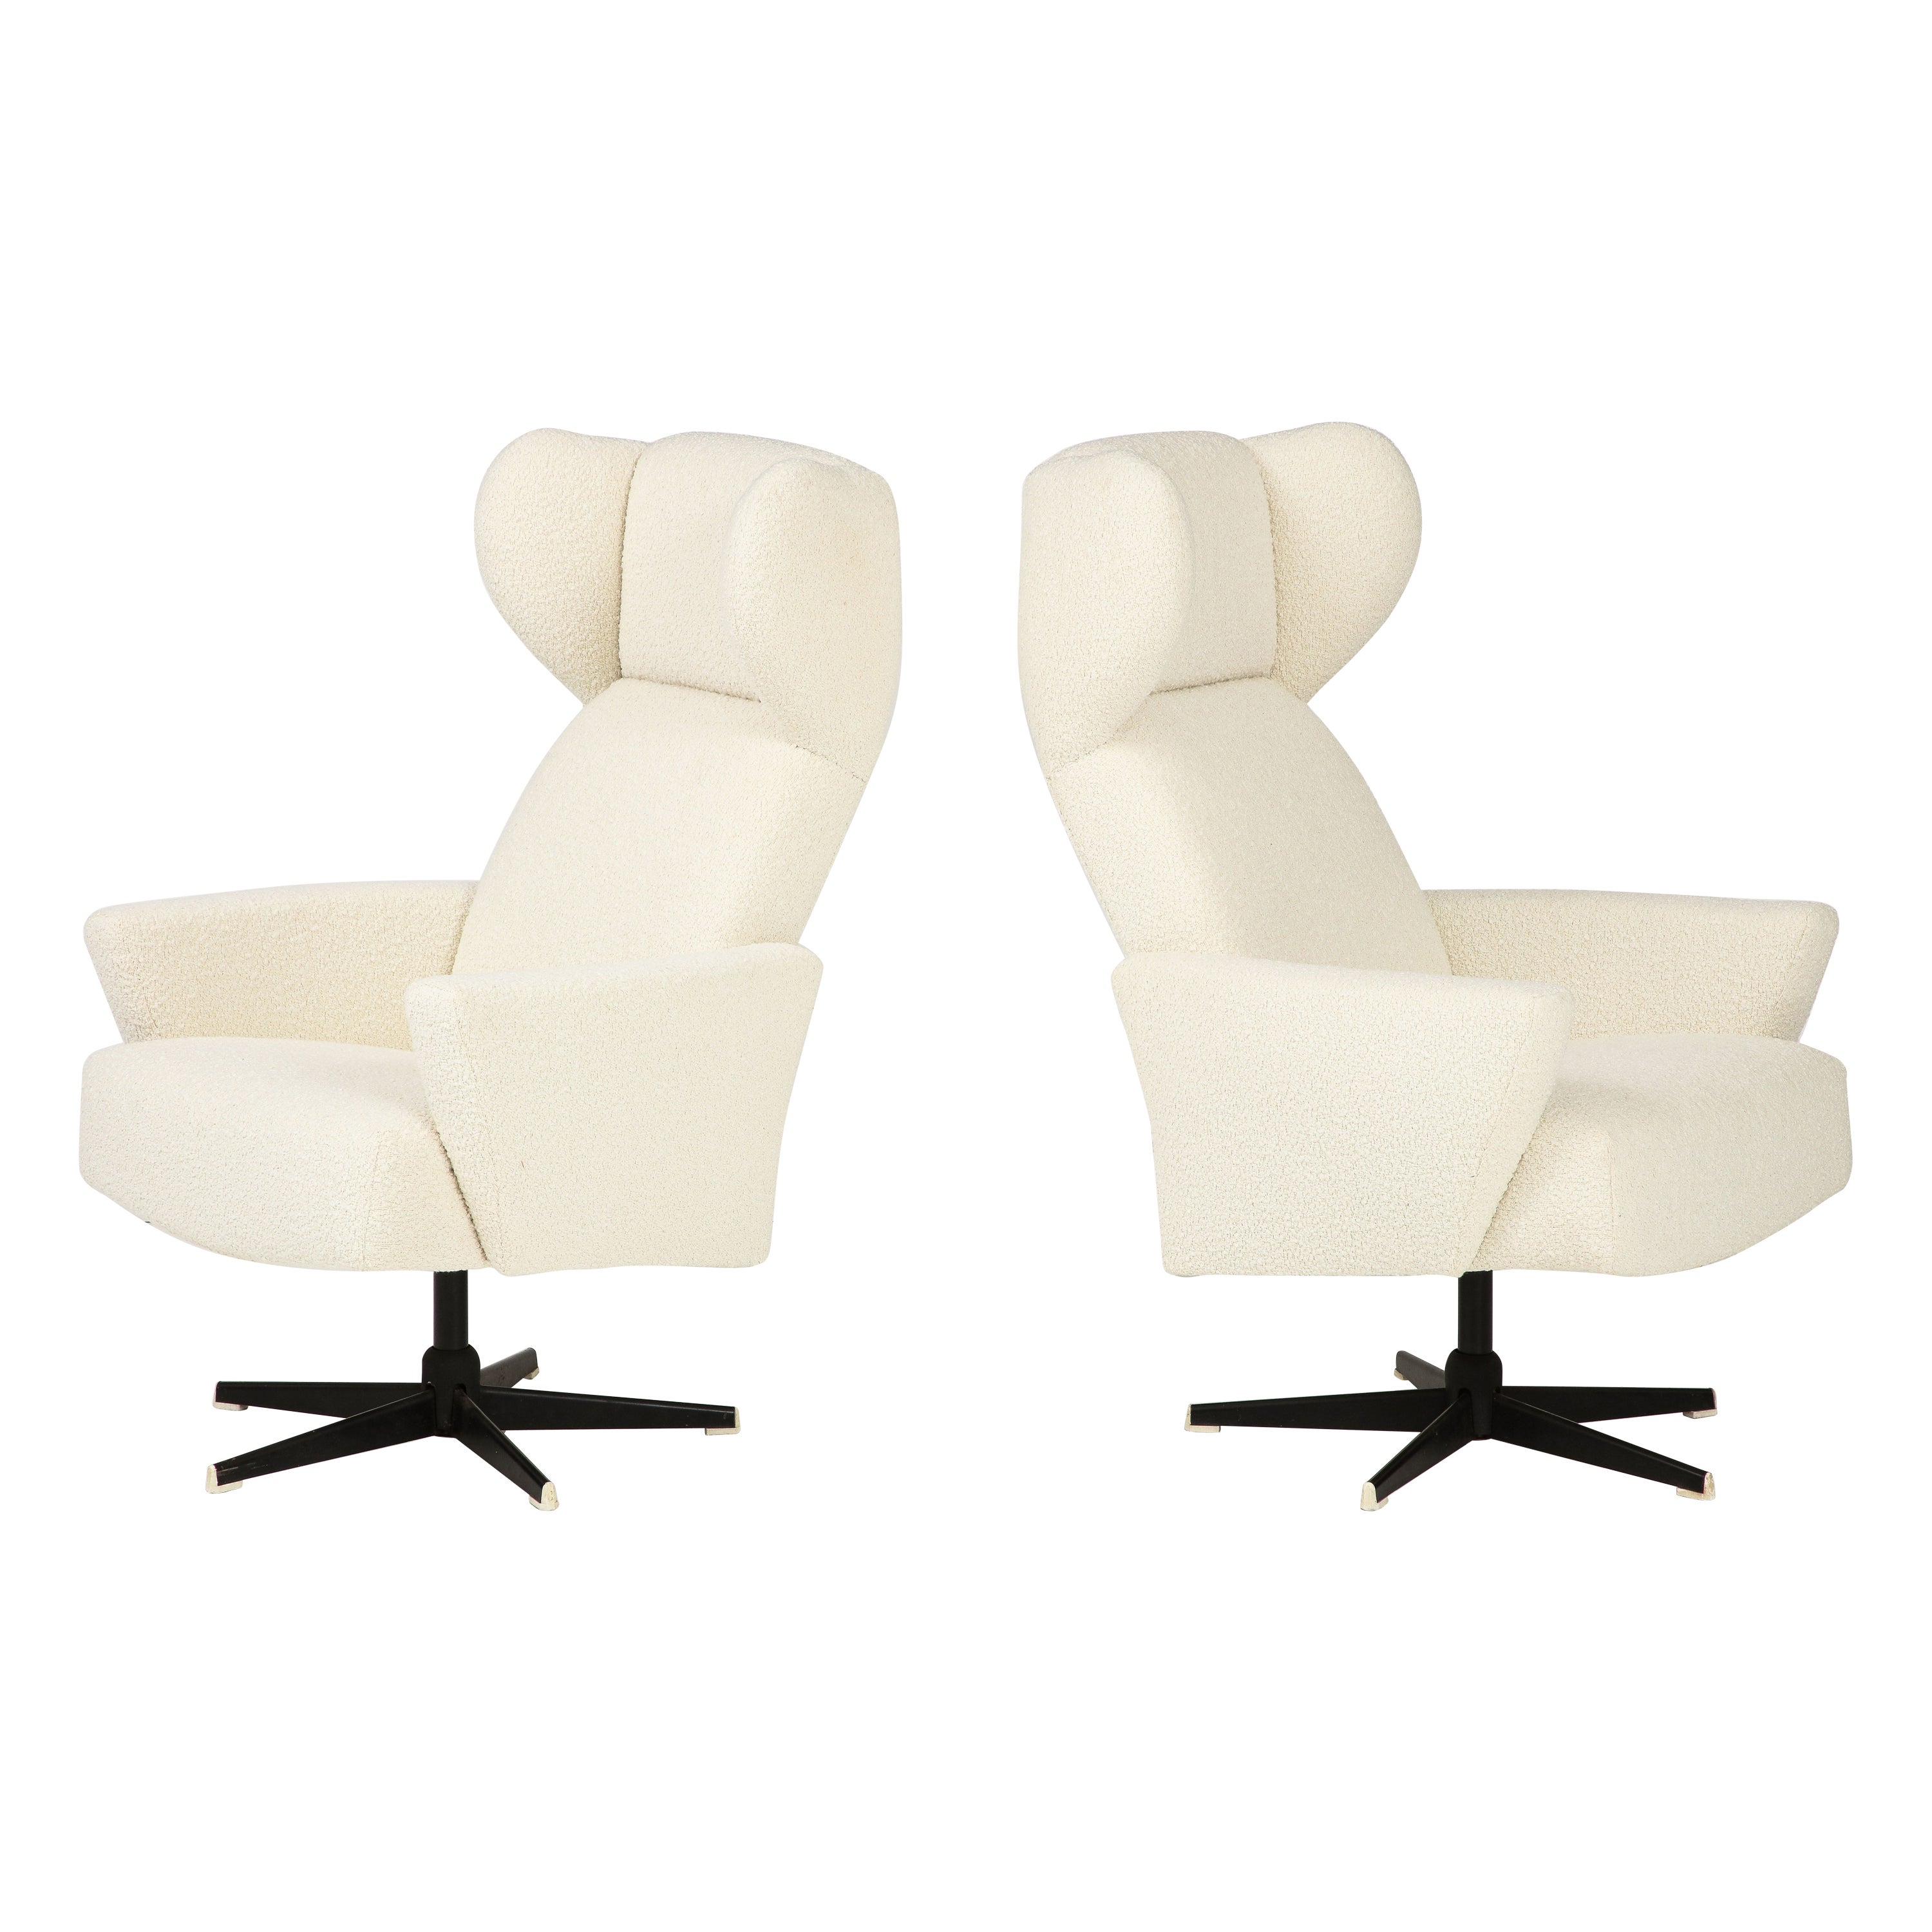 Pair of Italian Modernist High-Back Swivel Chairs, Italy, circa 1960 For Sale